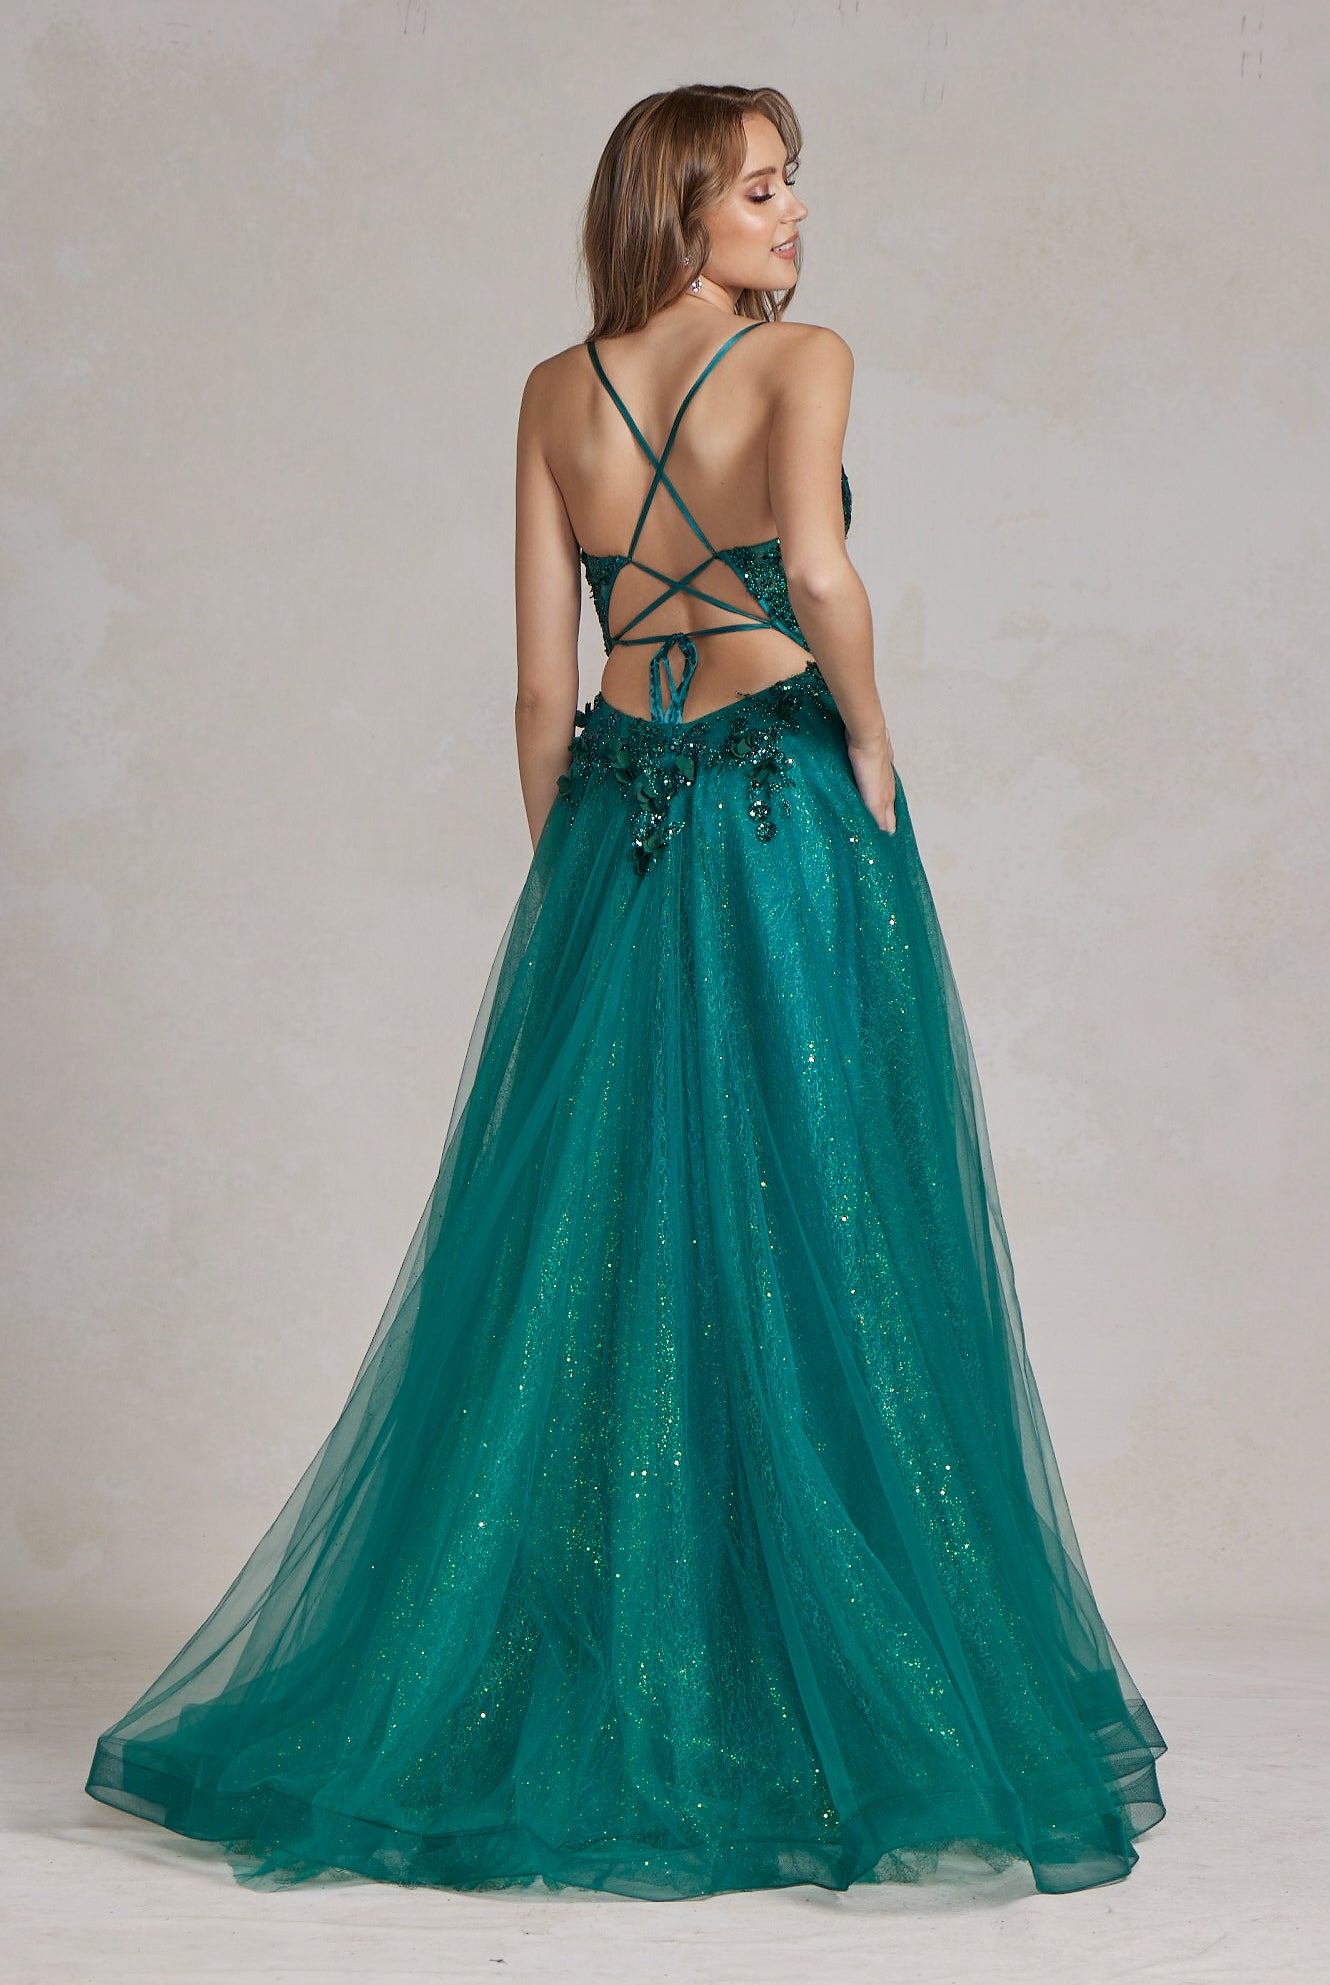 Tulle Skirt Embroidered Lace Open Criss Cross Back Long Prom Dress NXC1113-Prom Dress-smcfashion.com